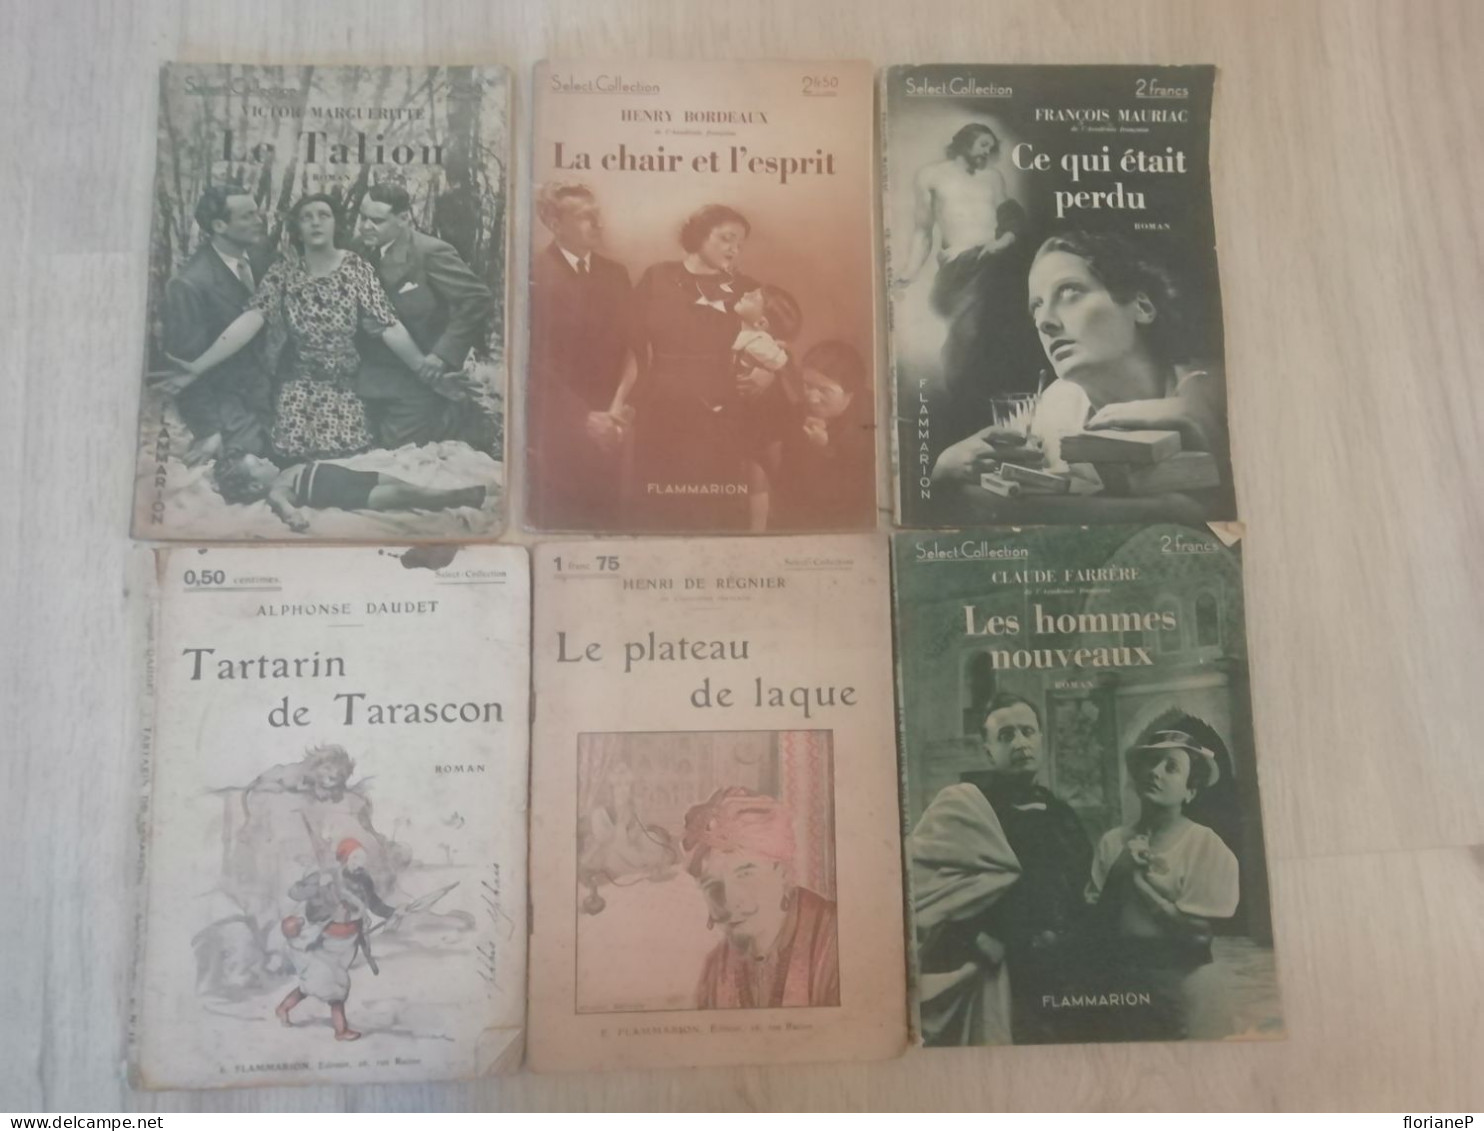 Select-Collection - Flammarion - Classic Authors